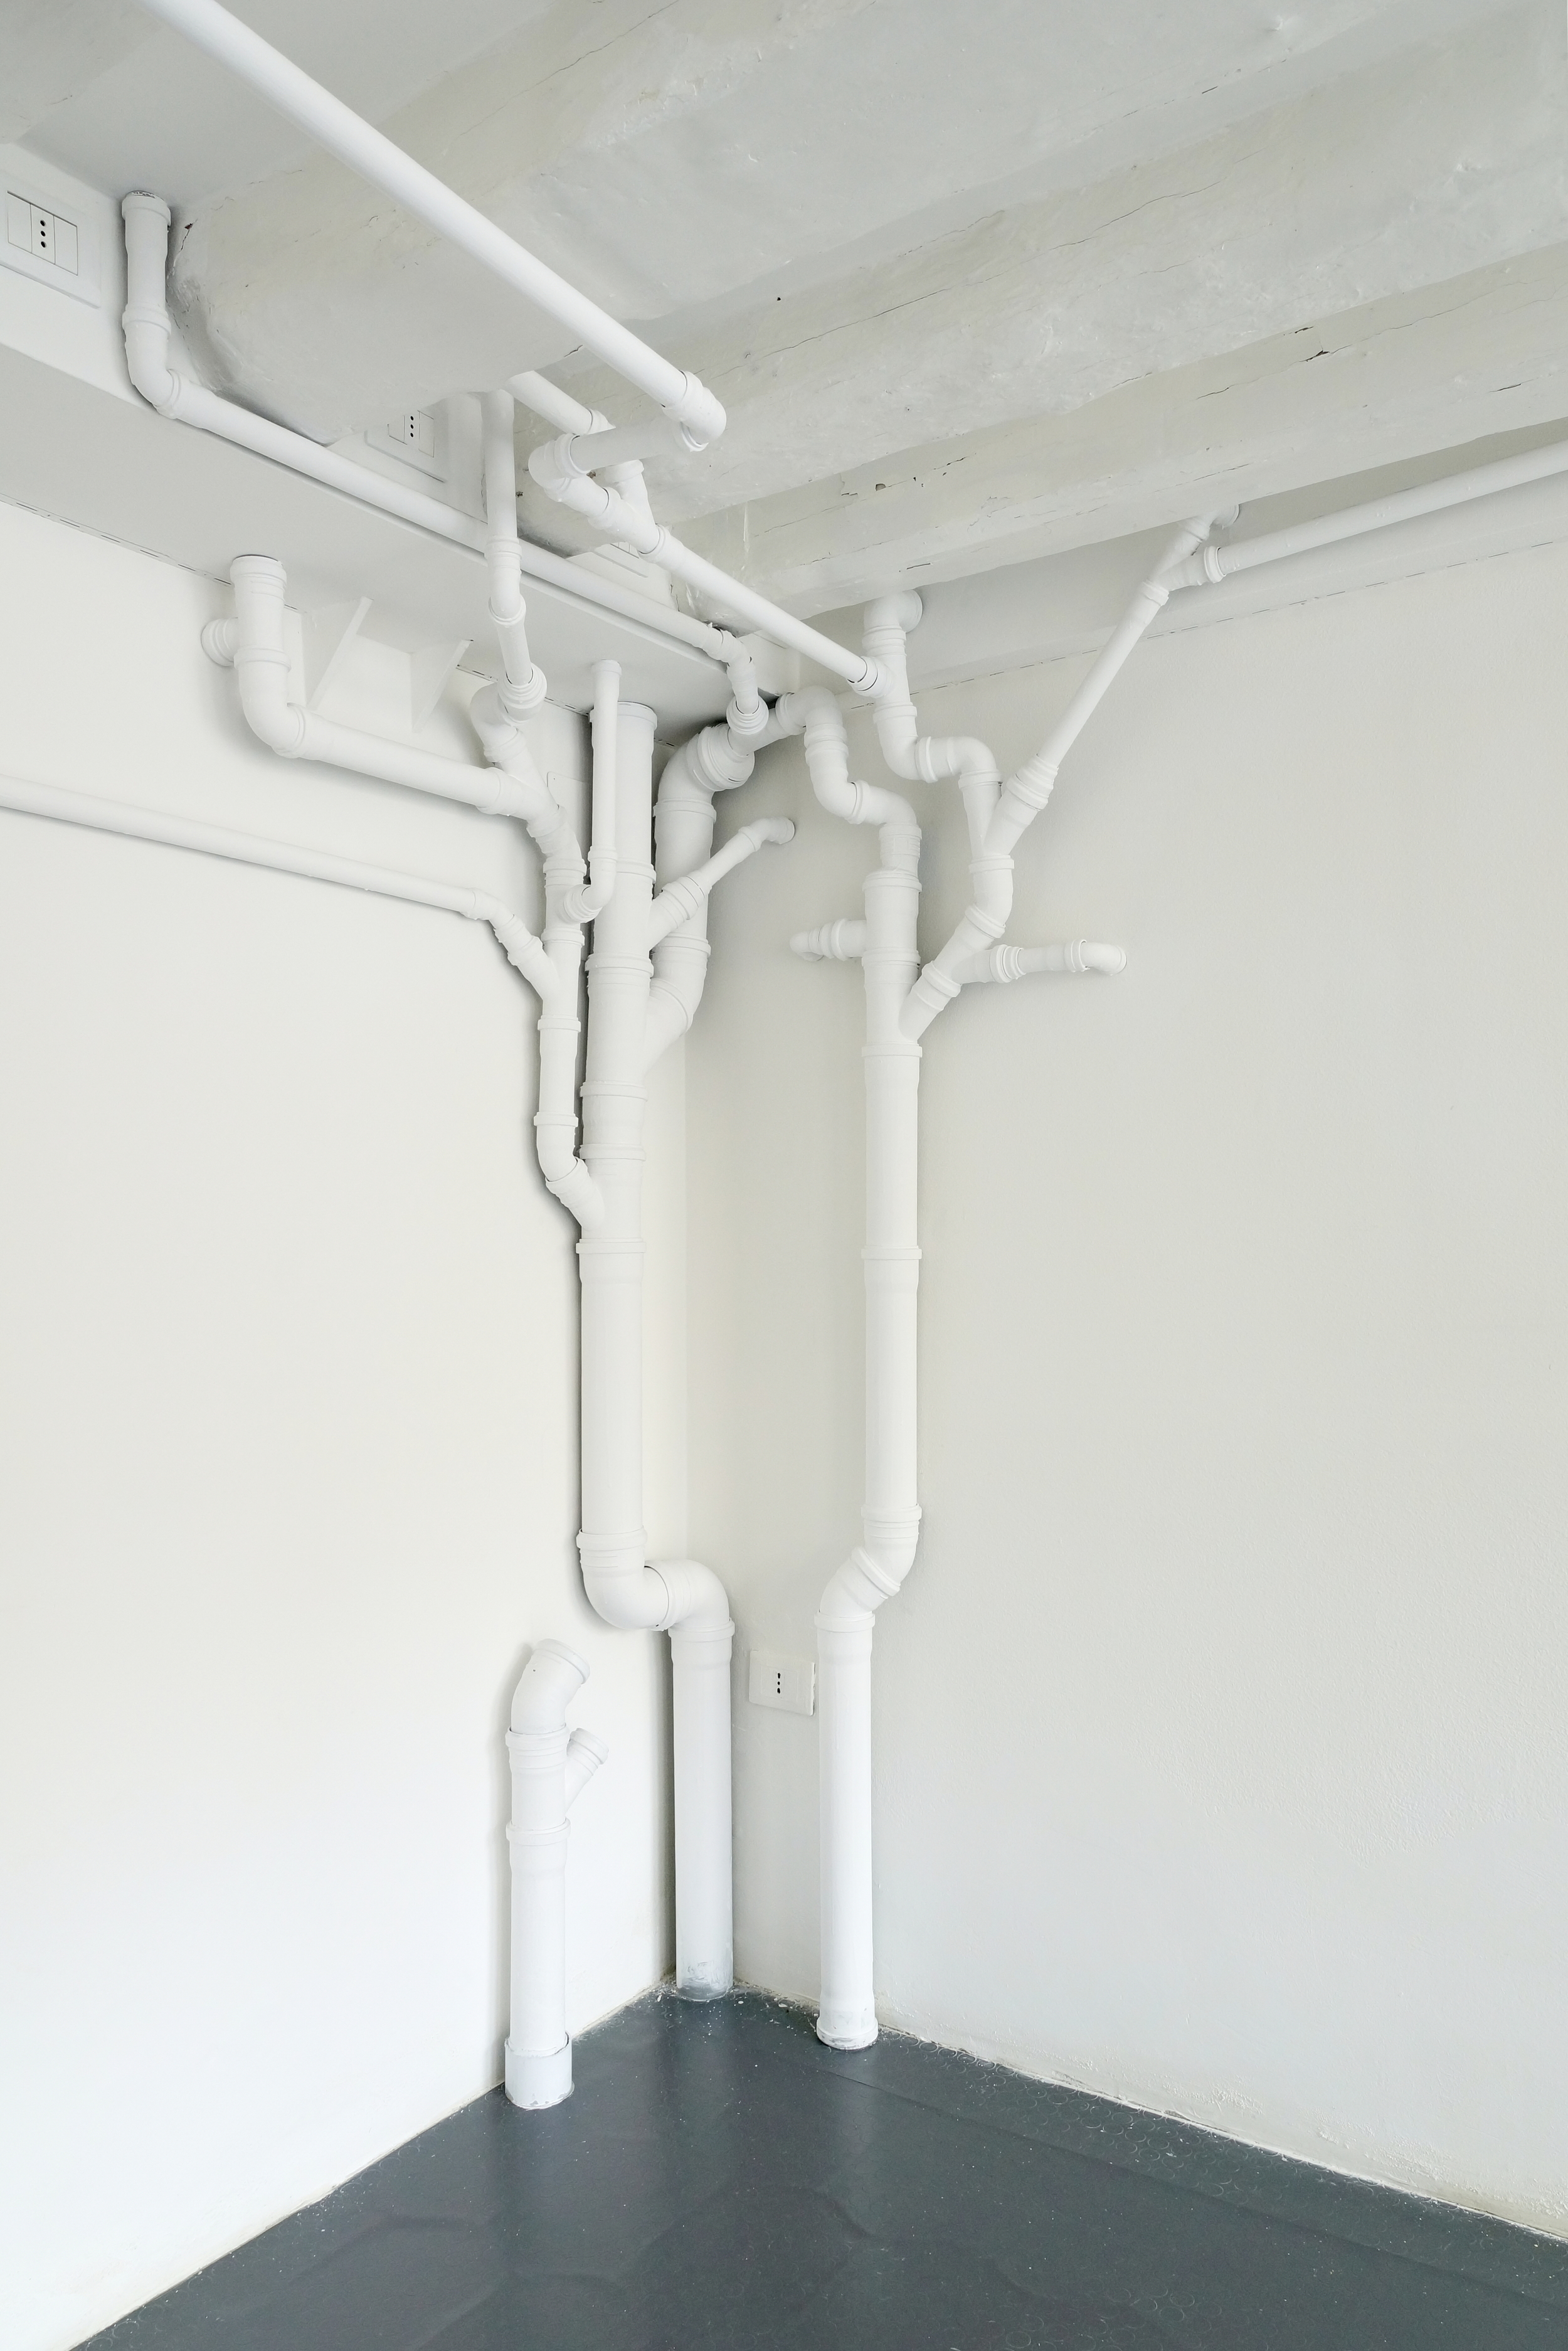 SANITARY INSTALLATION (2013) PVC pipe and connections, paint. 300X400X220 cm variable